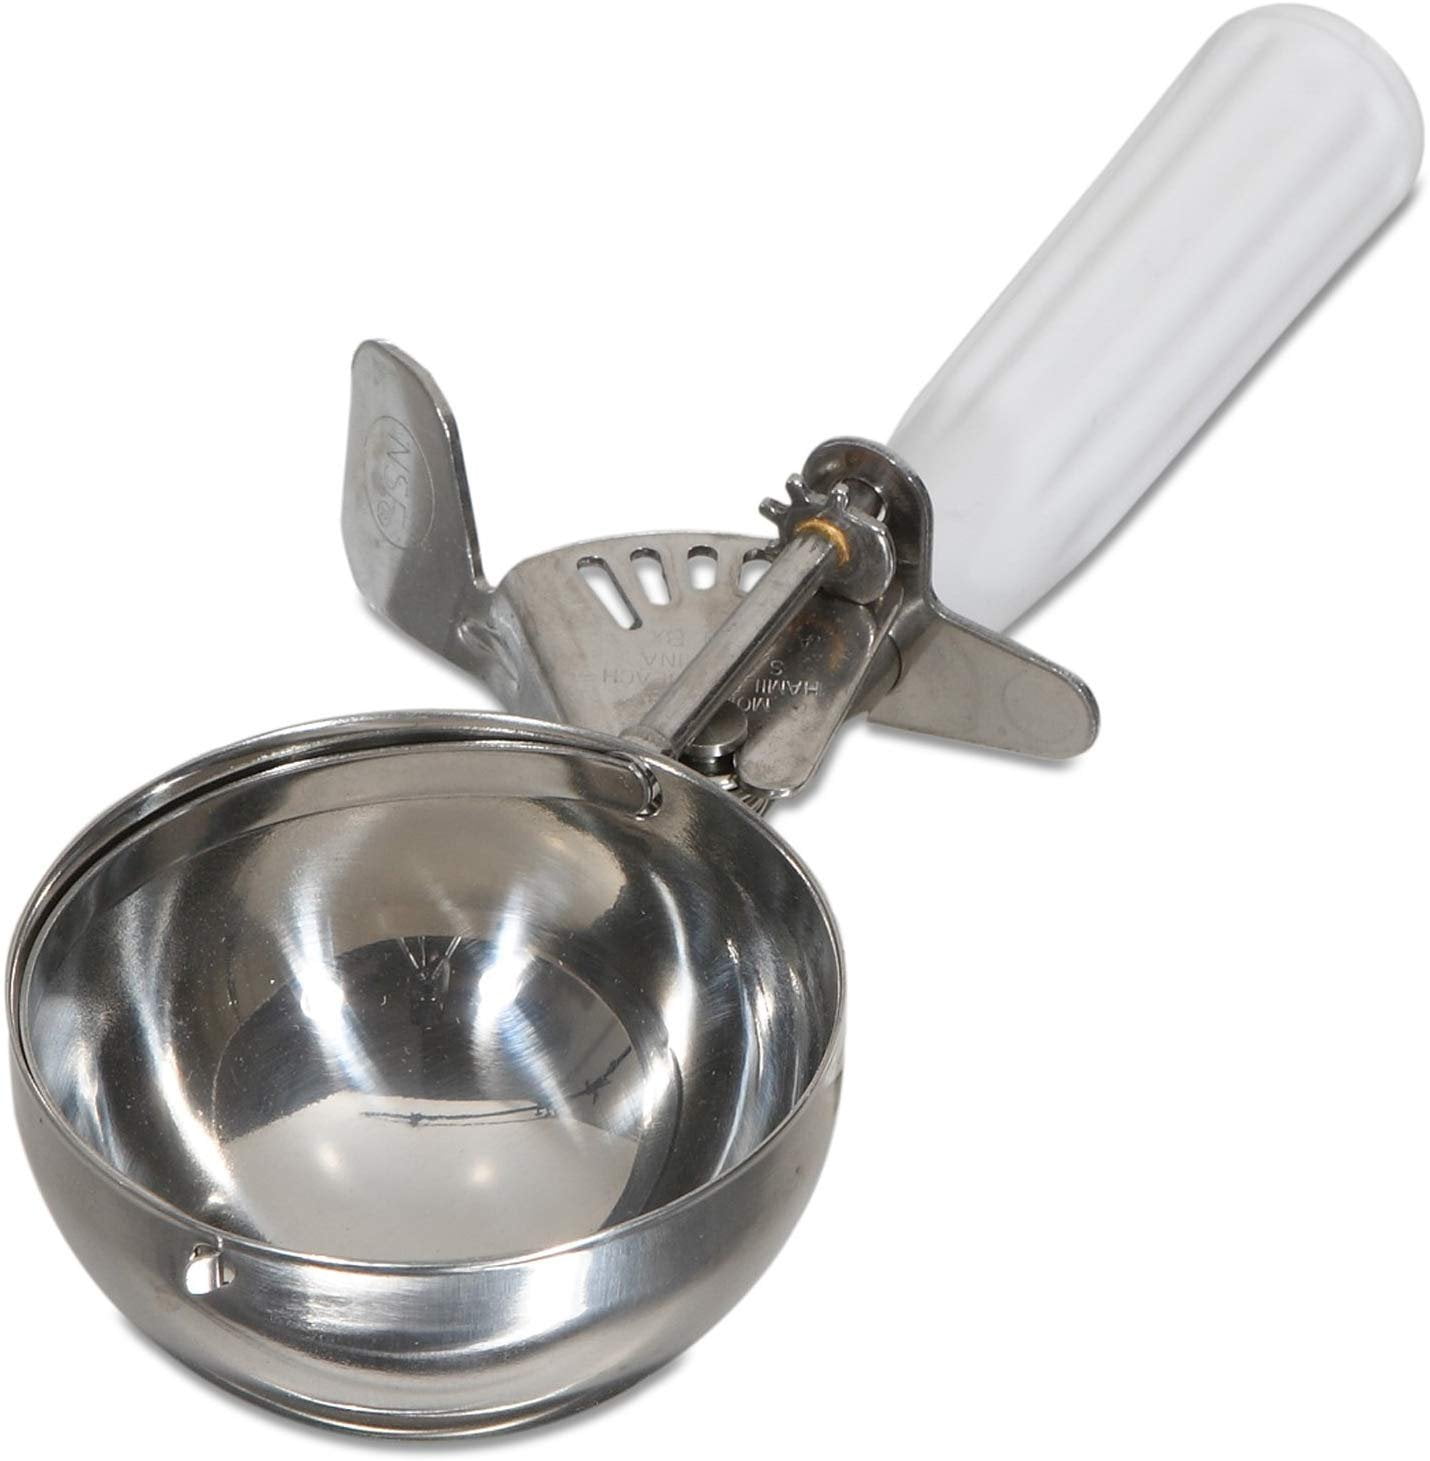 2 Stainless Steel Cookie Scoop by Celebrate It®